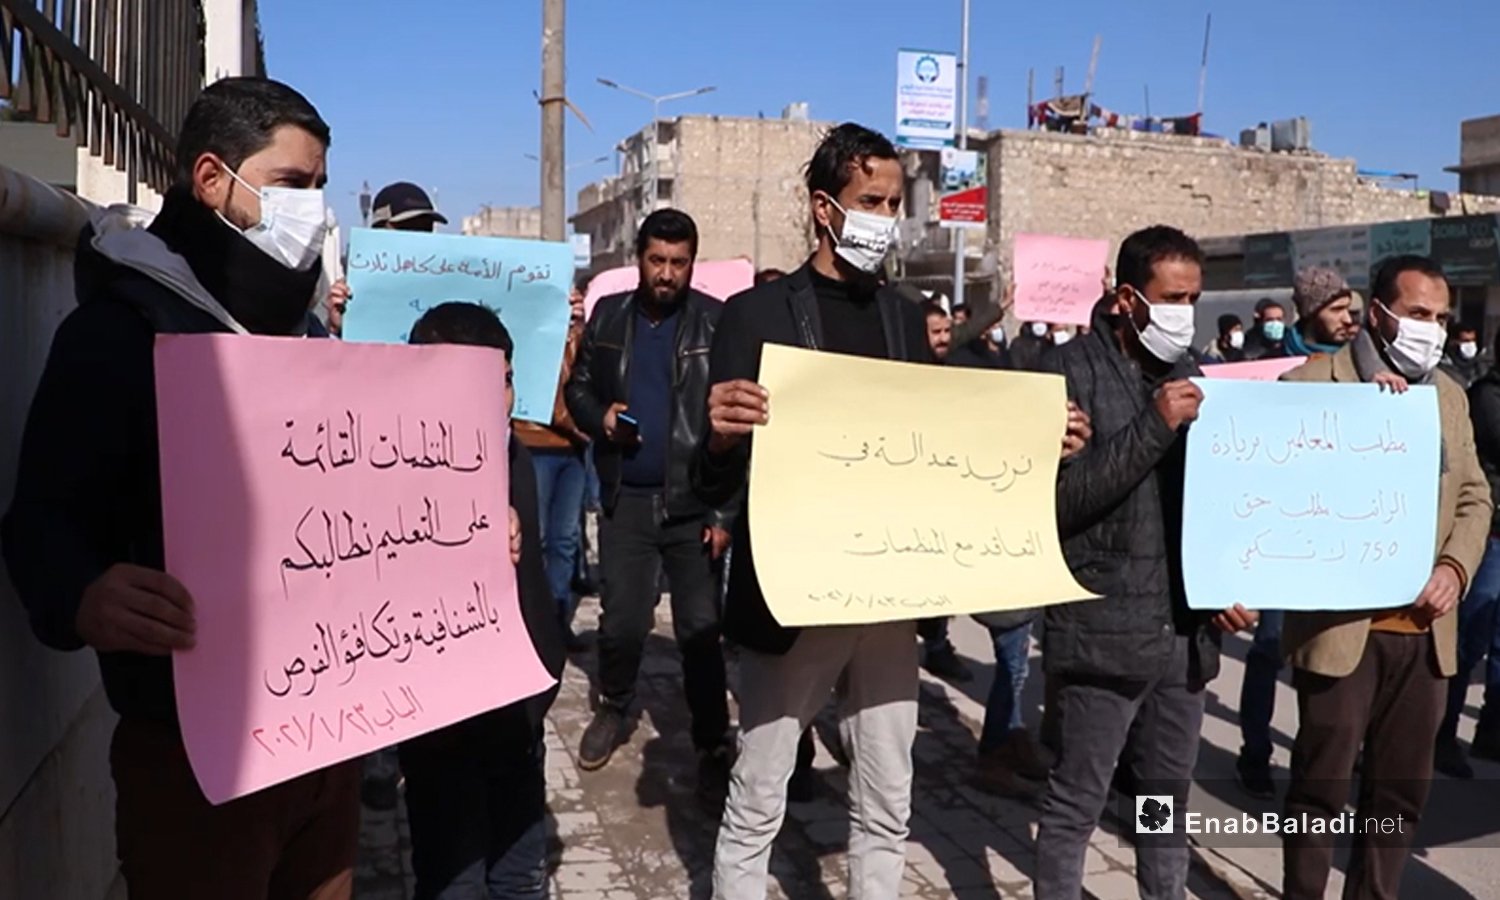 Syria’s al-Bab: Teachers renew cry over low pay and absence of teacher’s union